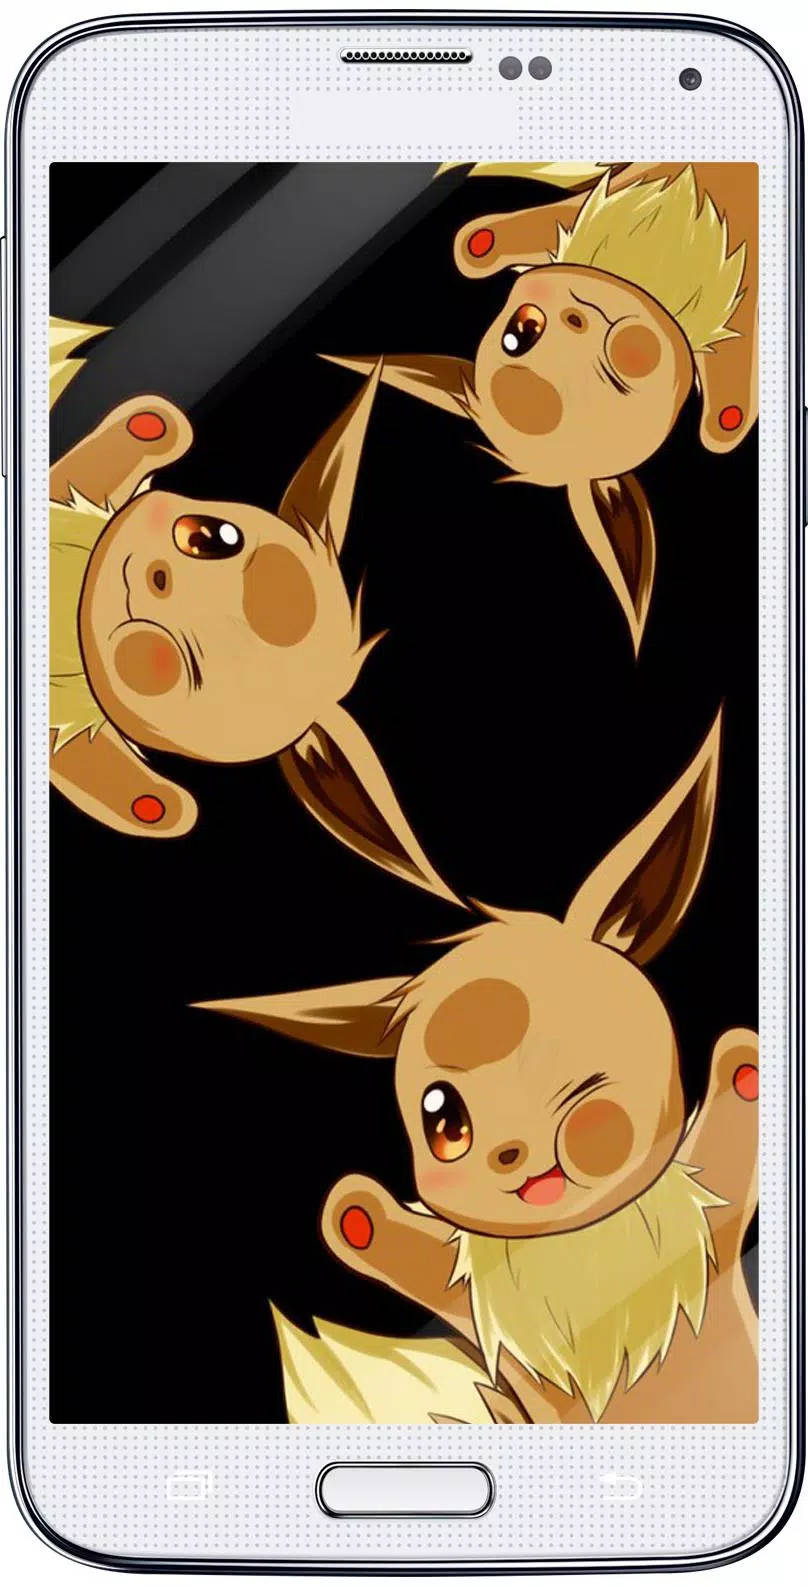 Unlock the power of cuteness with an Eevee-themed iPhone. Wallpaper